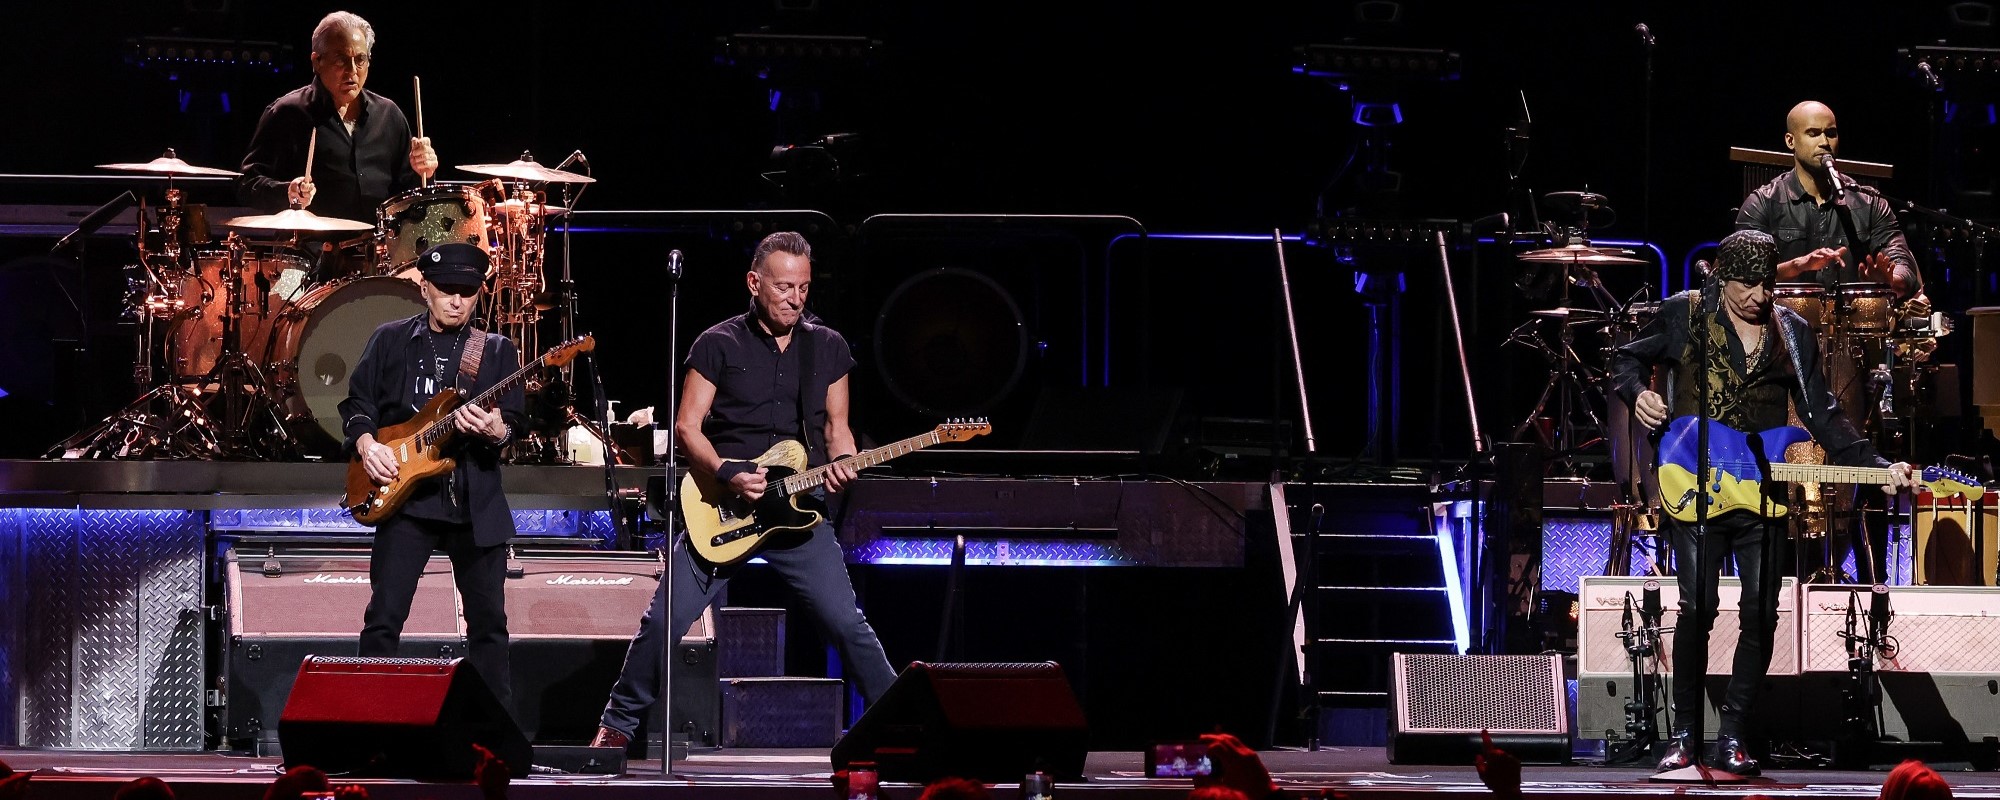 Born to Tour: New Bruce Springsteen Documentary Focusing on His Latest Trek to Premiere This Fall